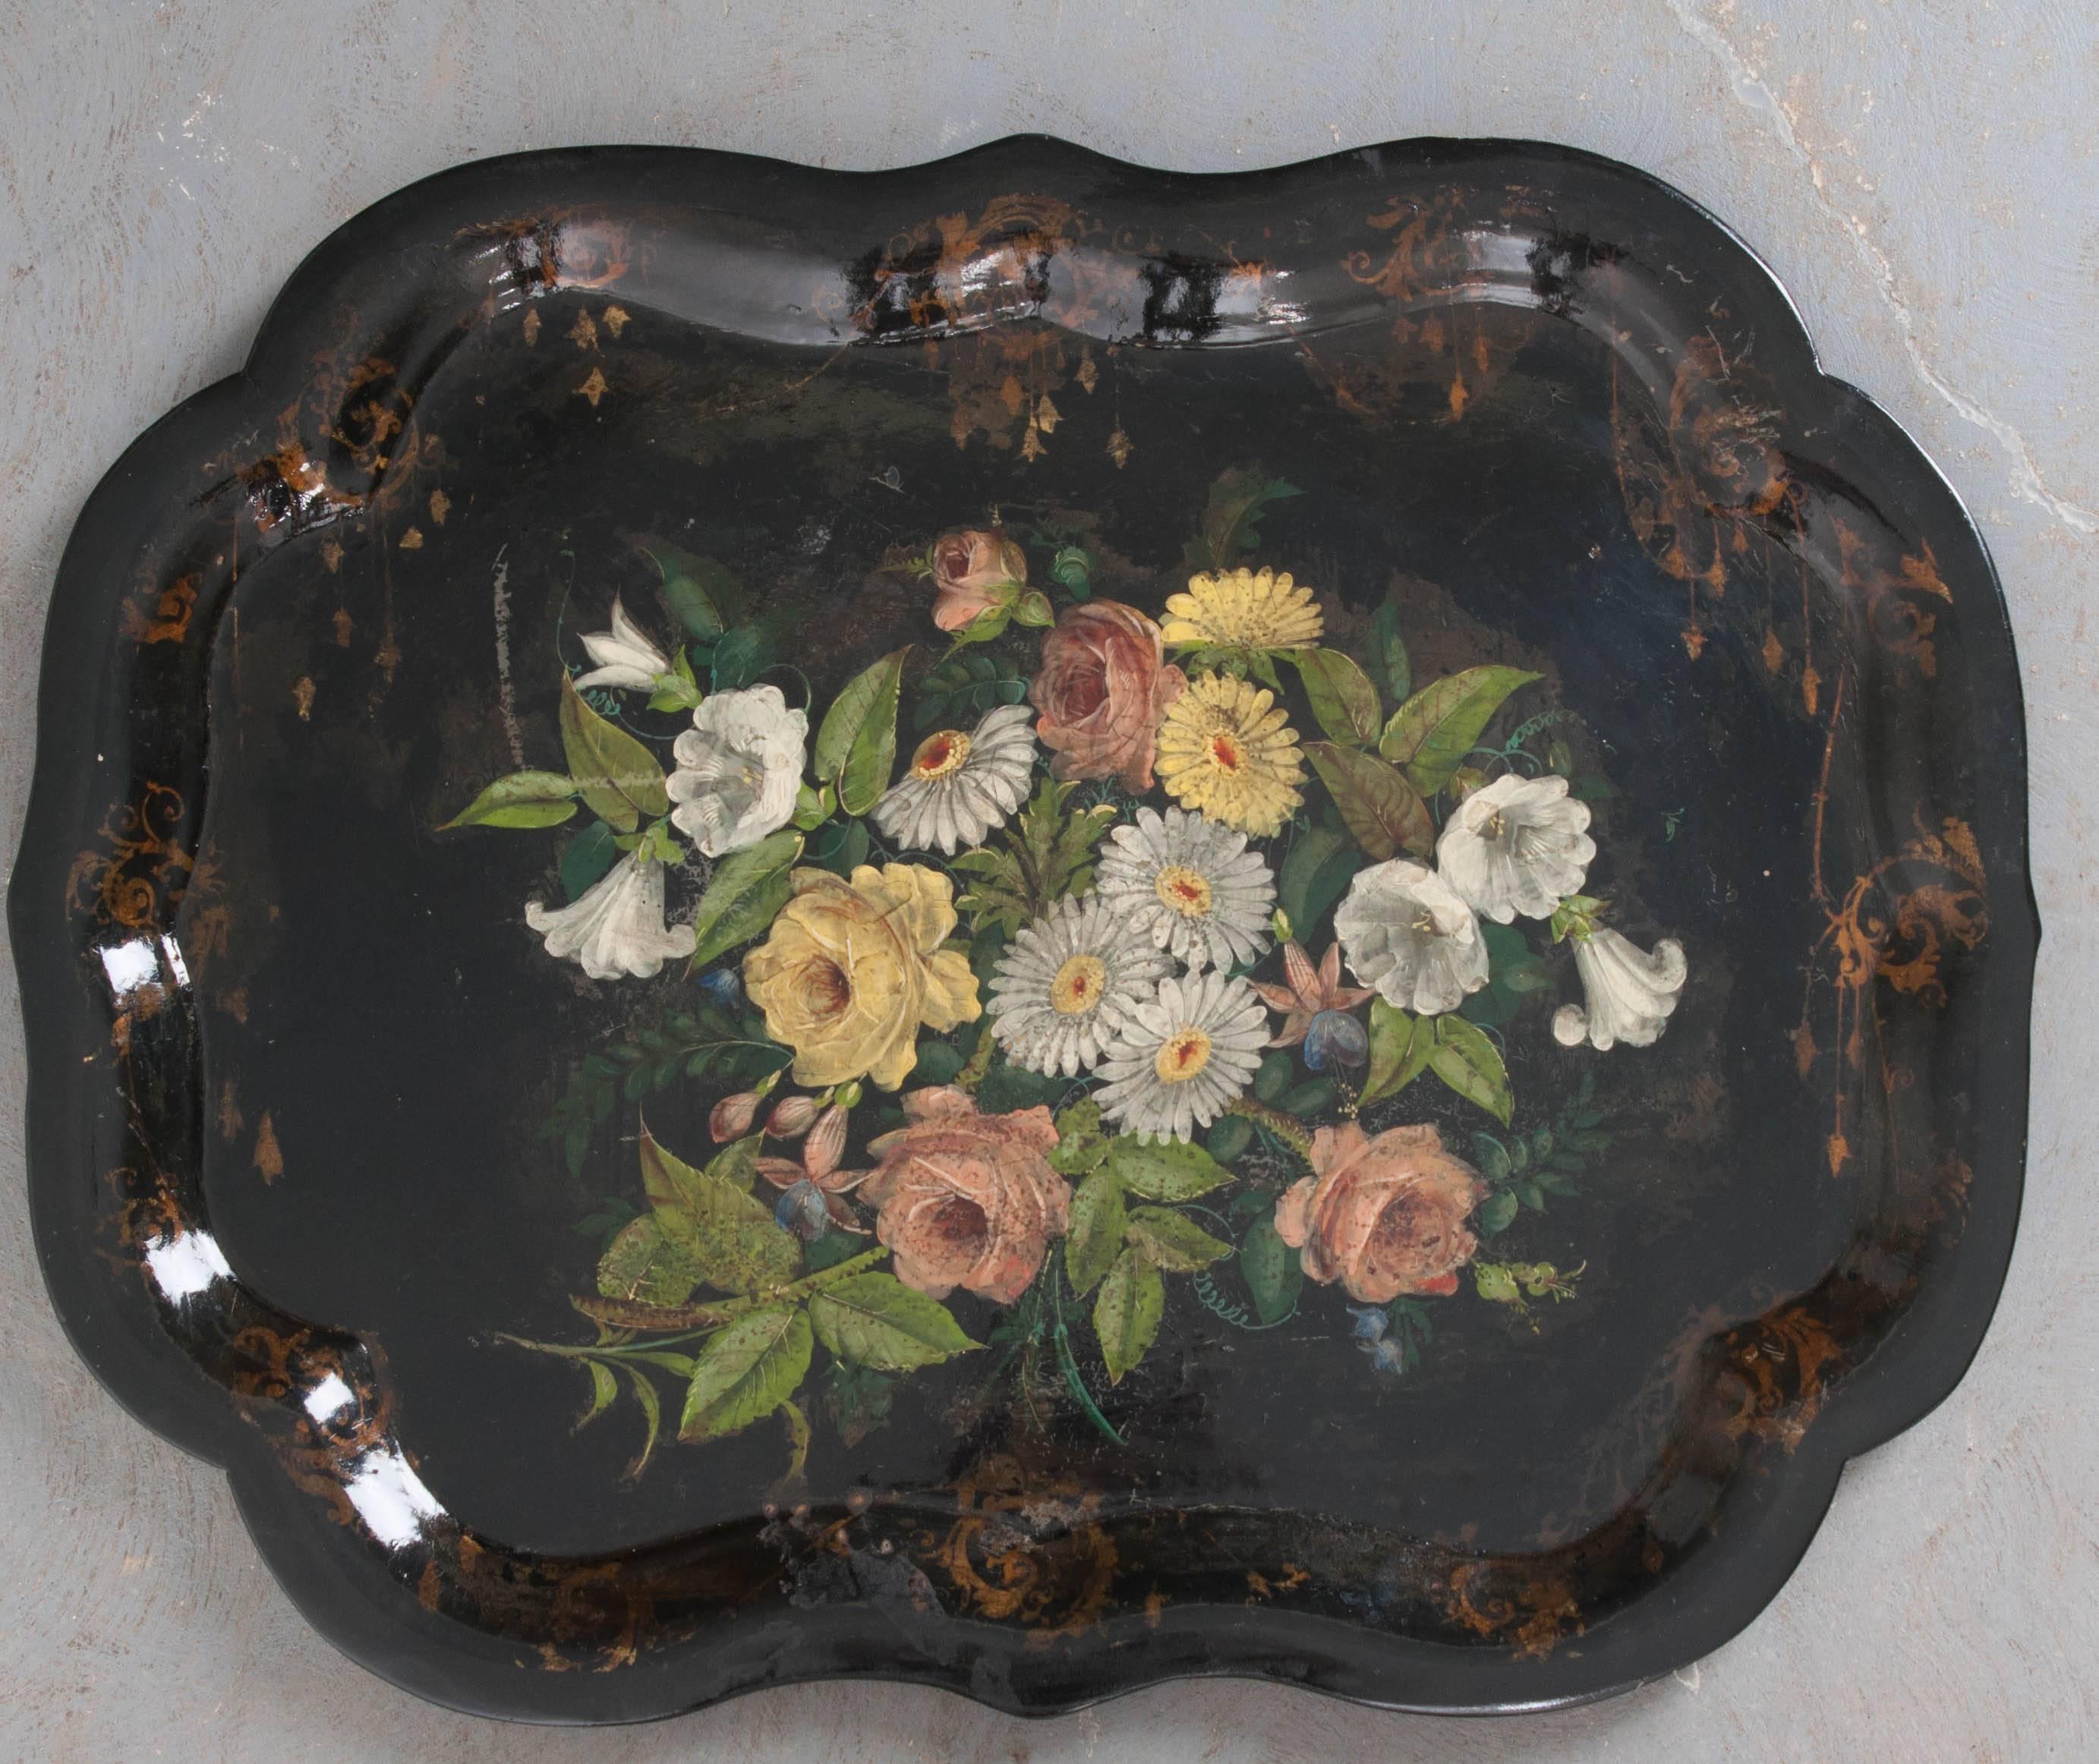 A gorgeous English Papier Mâché gilt and polychrome tray with hand-painted floral motifs, circa 1850.